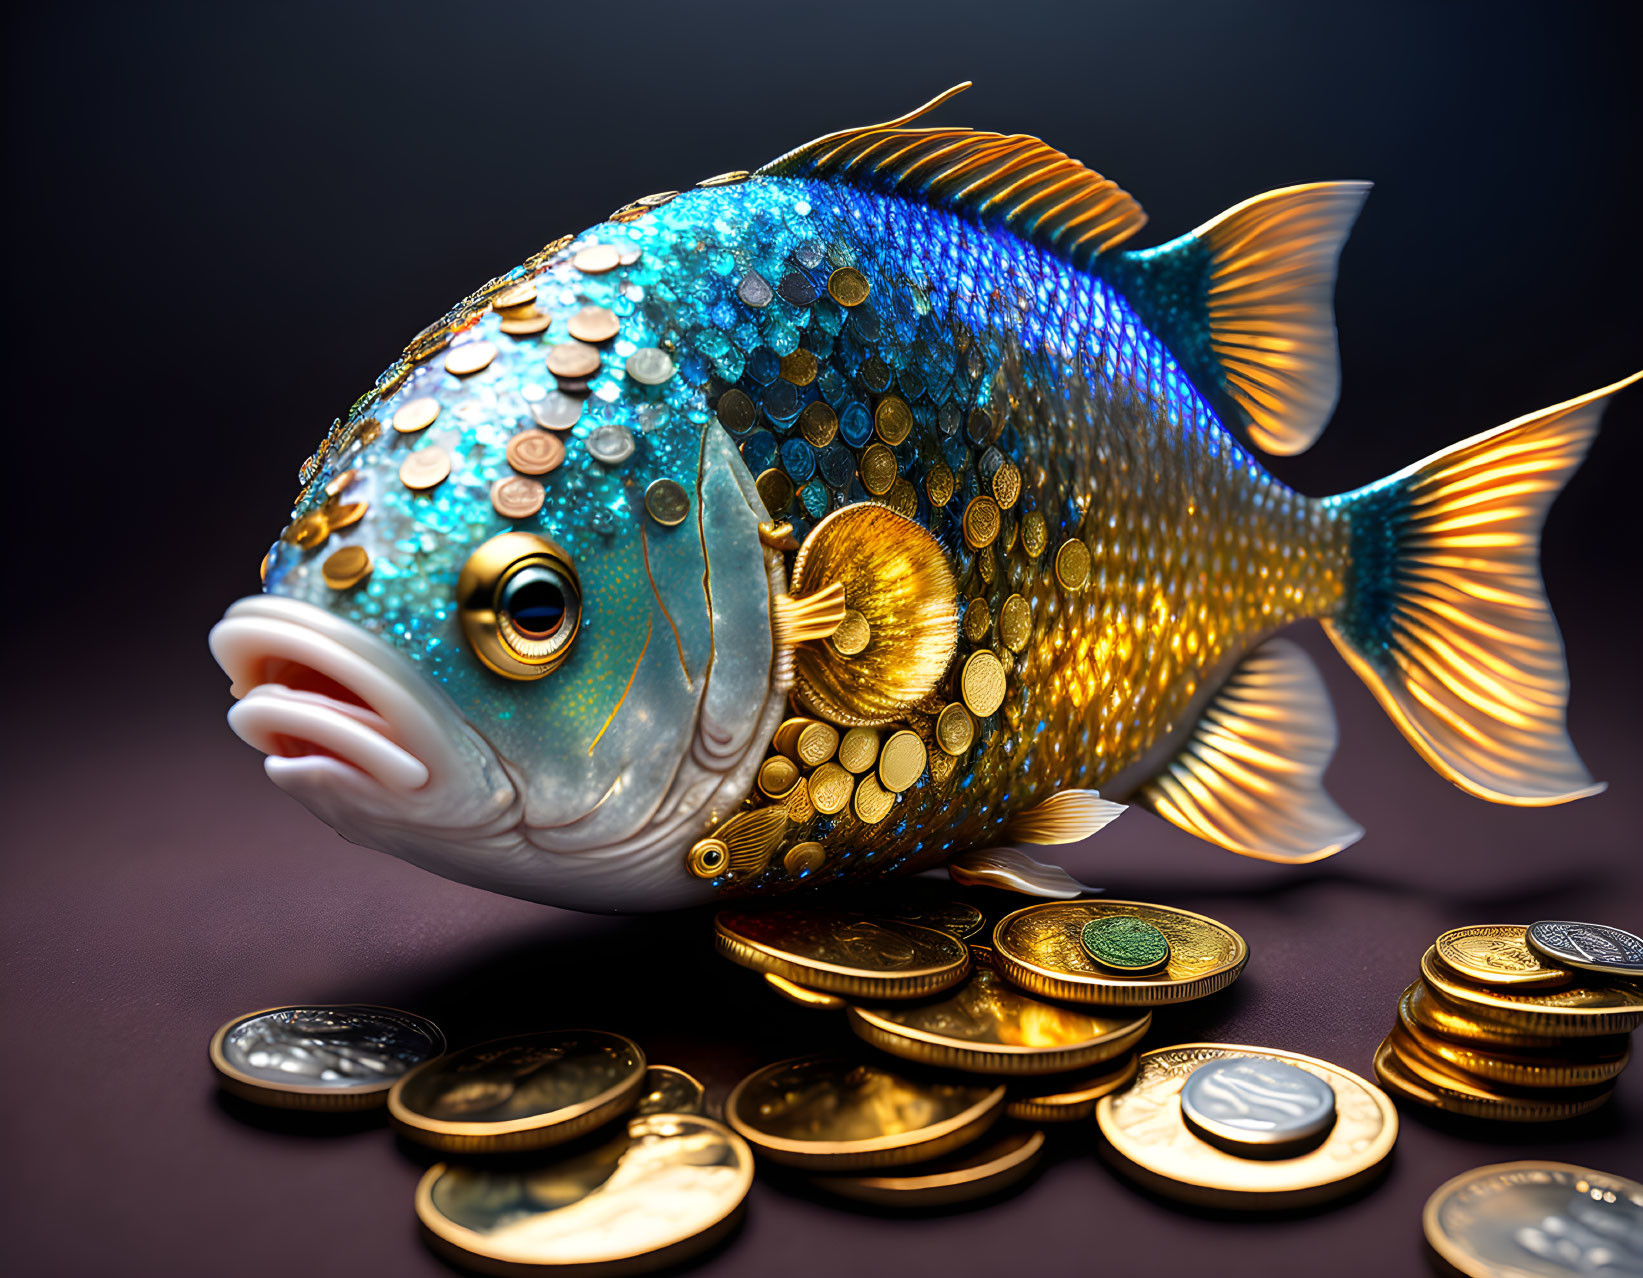 Colorful Fish Artwork with Coin-like Scales on Dark Background